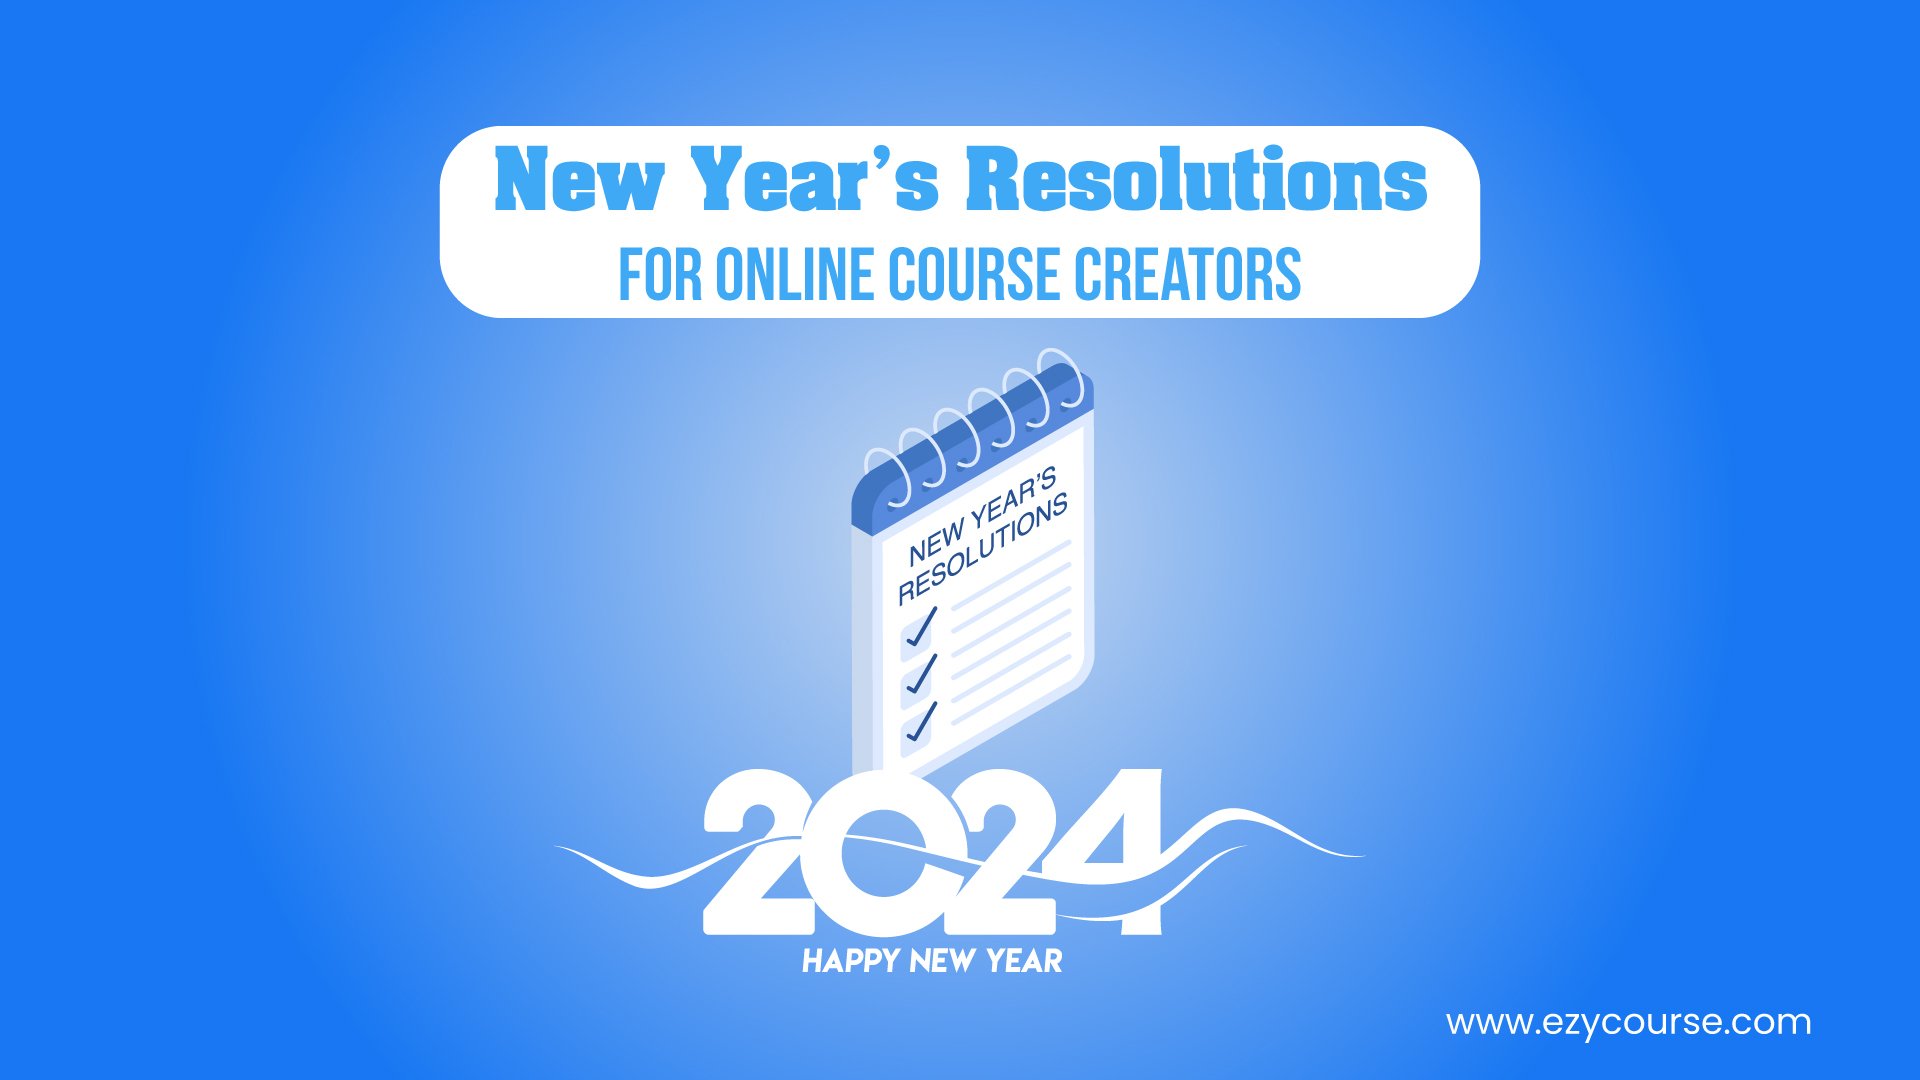 10 New Year’s Resolutions for Online Course Creators in 2024